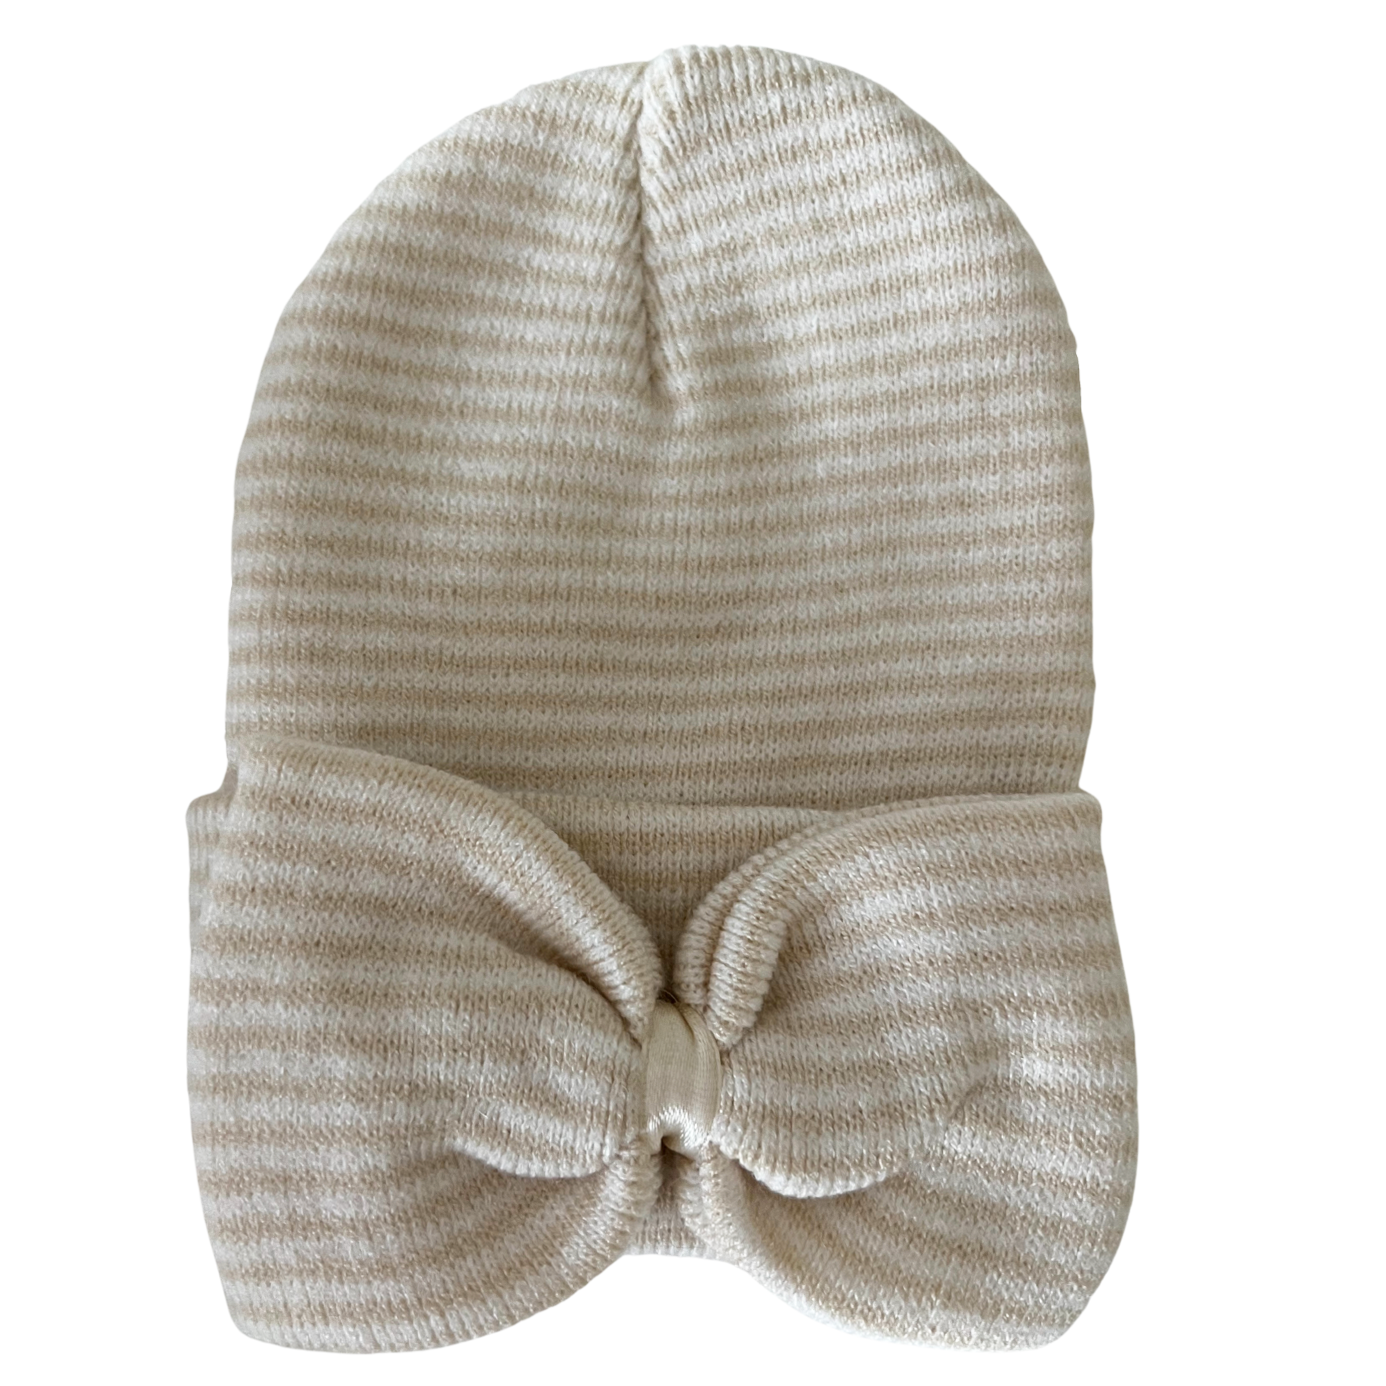 Baby's First Hat, Sand/White Stripe Bow